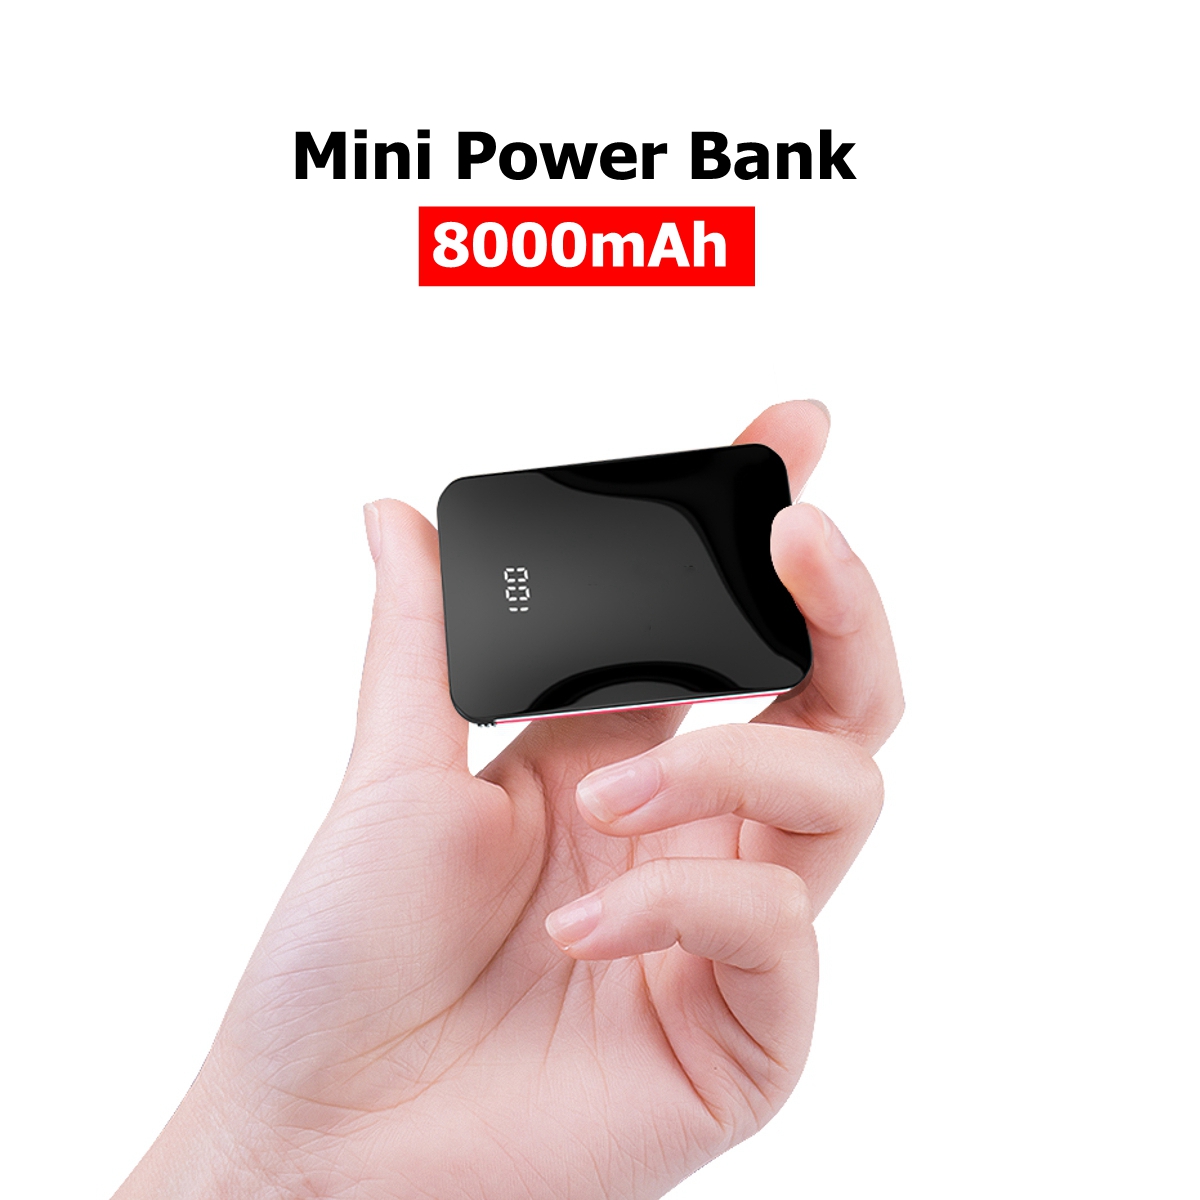 8000mAh-Mini-Power-Bank-Portable-Battery-Charger-Fast-Charge-Power-Bank-for-Samsung-for-iPhone-1439440-1